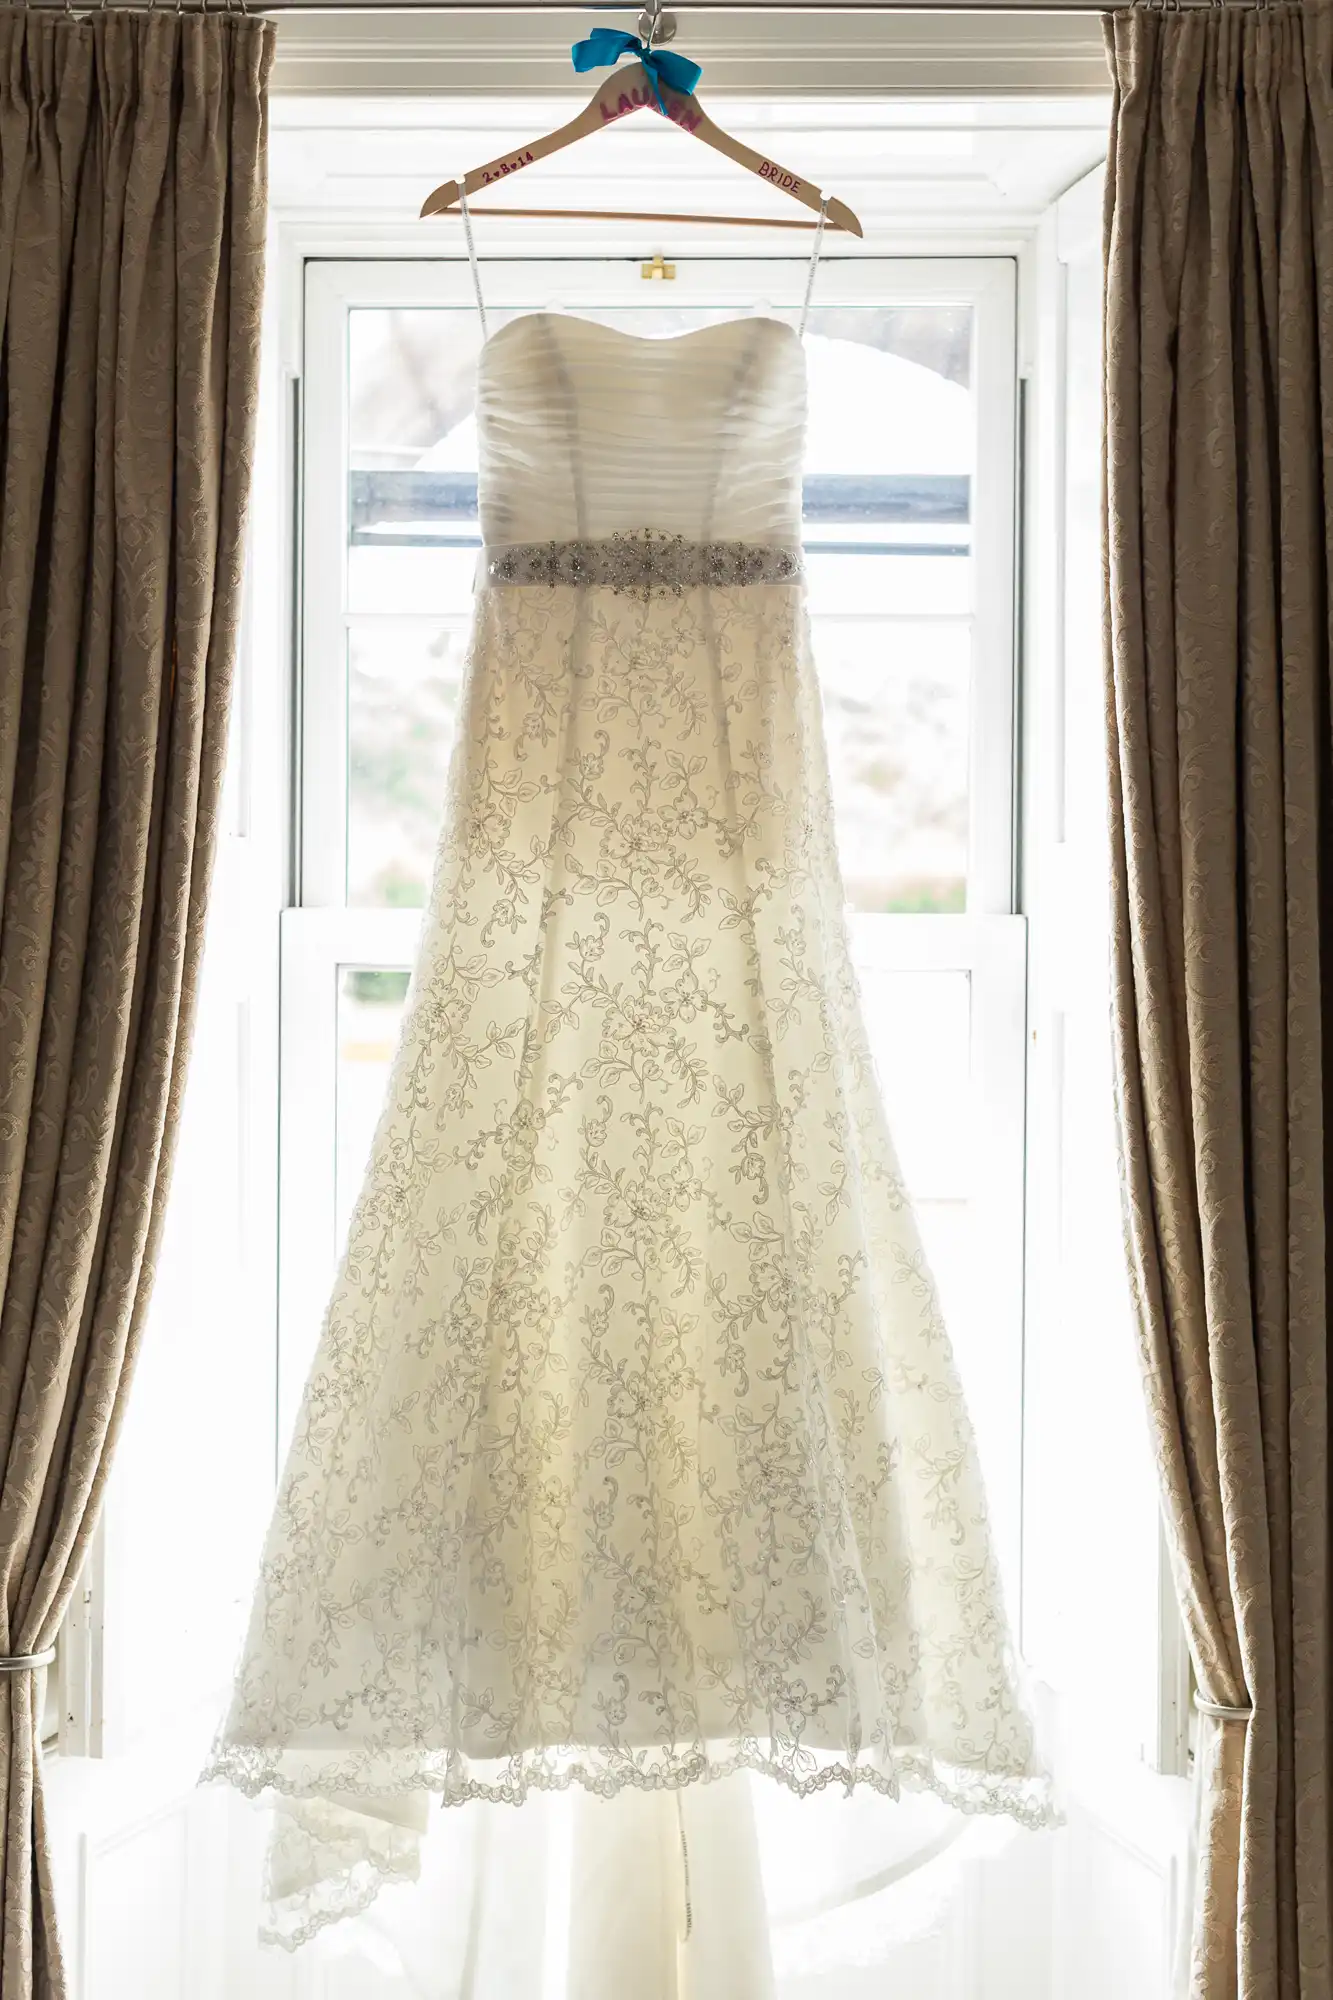 A wedding dress with lace detailing hangs on a wooden hanger in front of a window flanked by beige curtains.